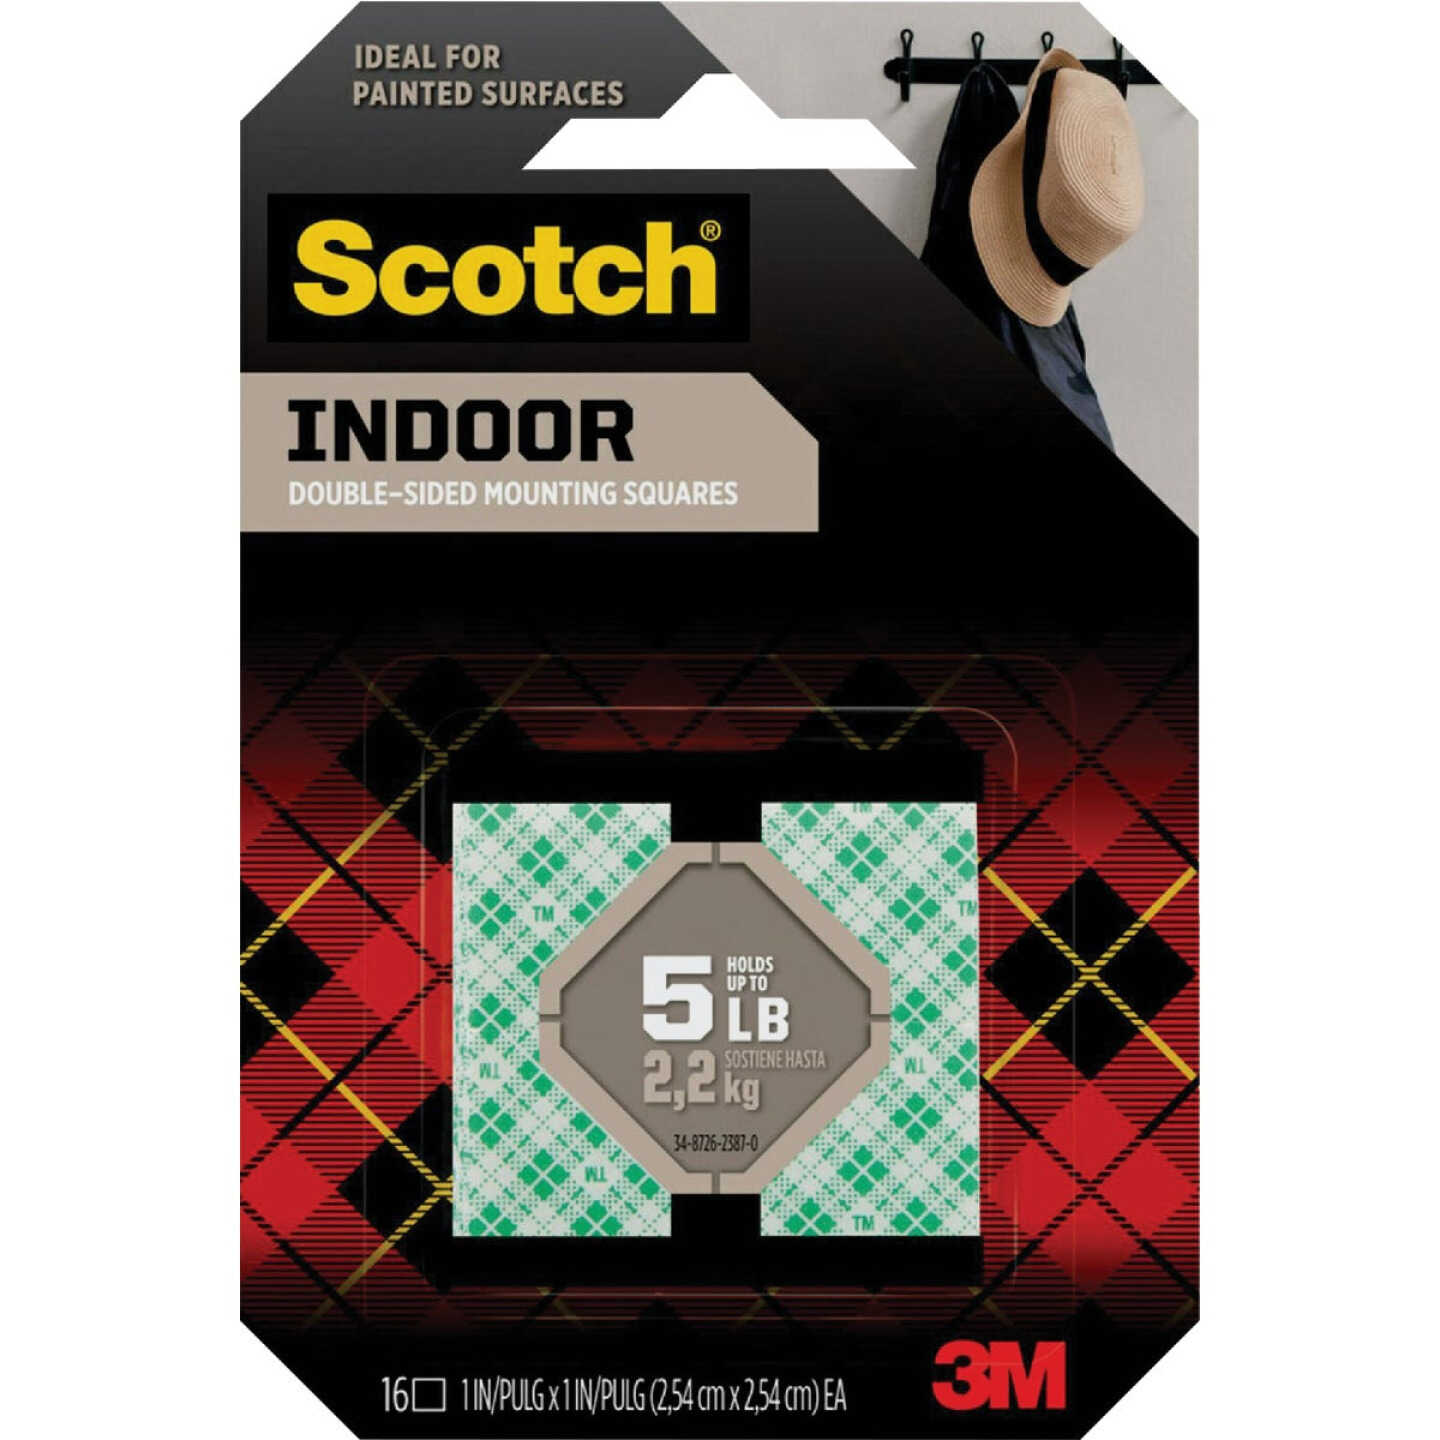 Scotch 1 In. x 1 In. Permanent Indoor Mounting Squares (16-Pack) - Randolph  Hardware